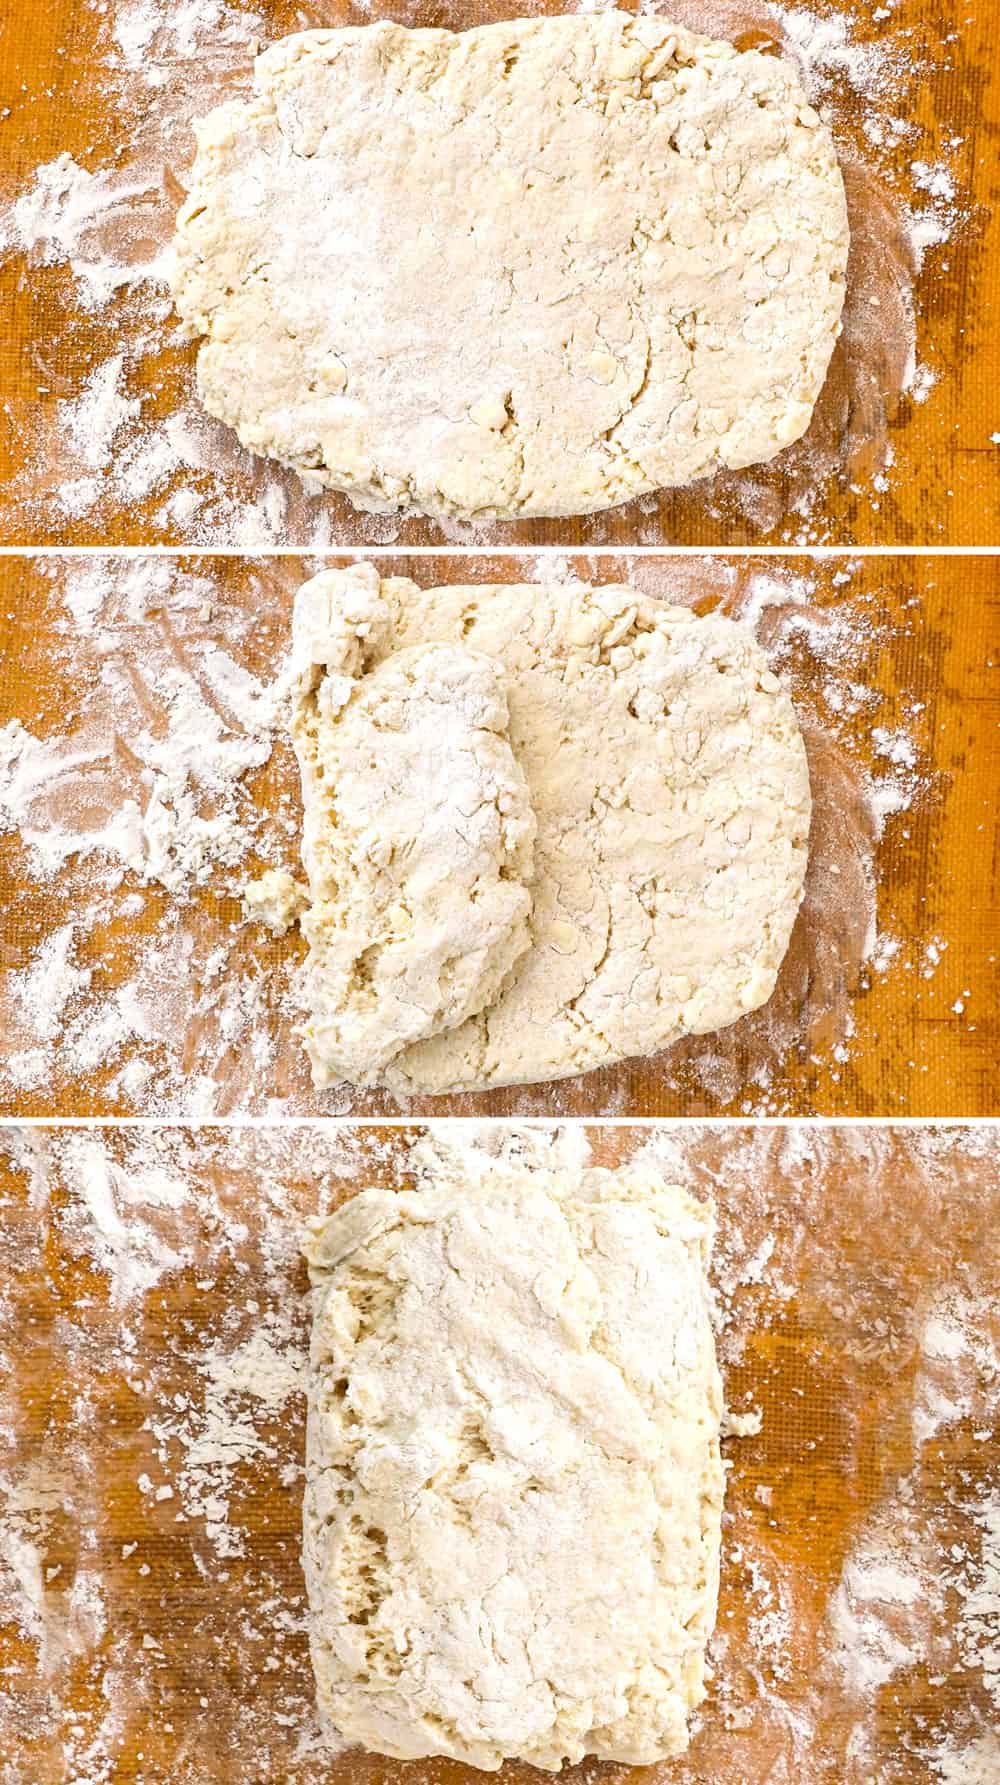 a collage showing how to make homemade biscuits and gravy recipe by layering the dough three times to create fluffy biscuits